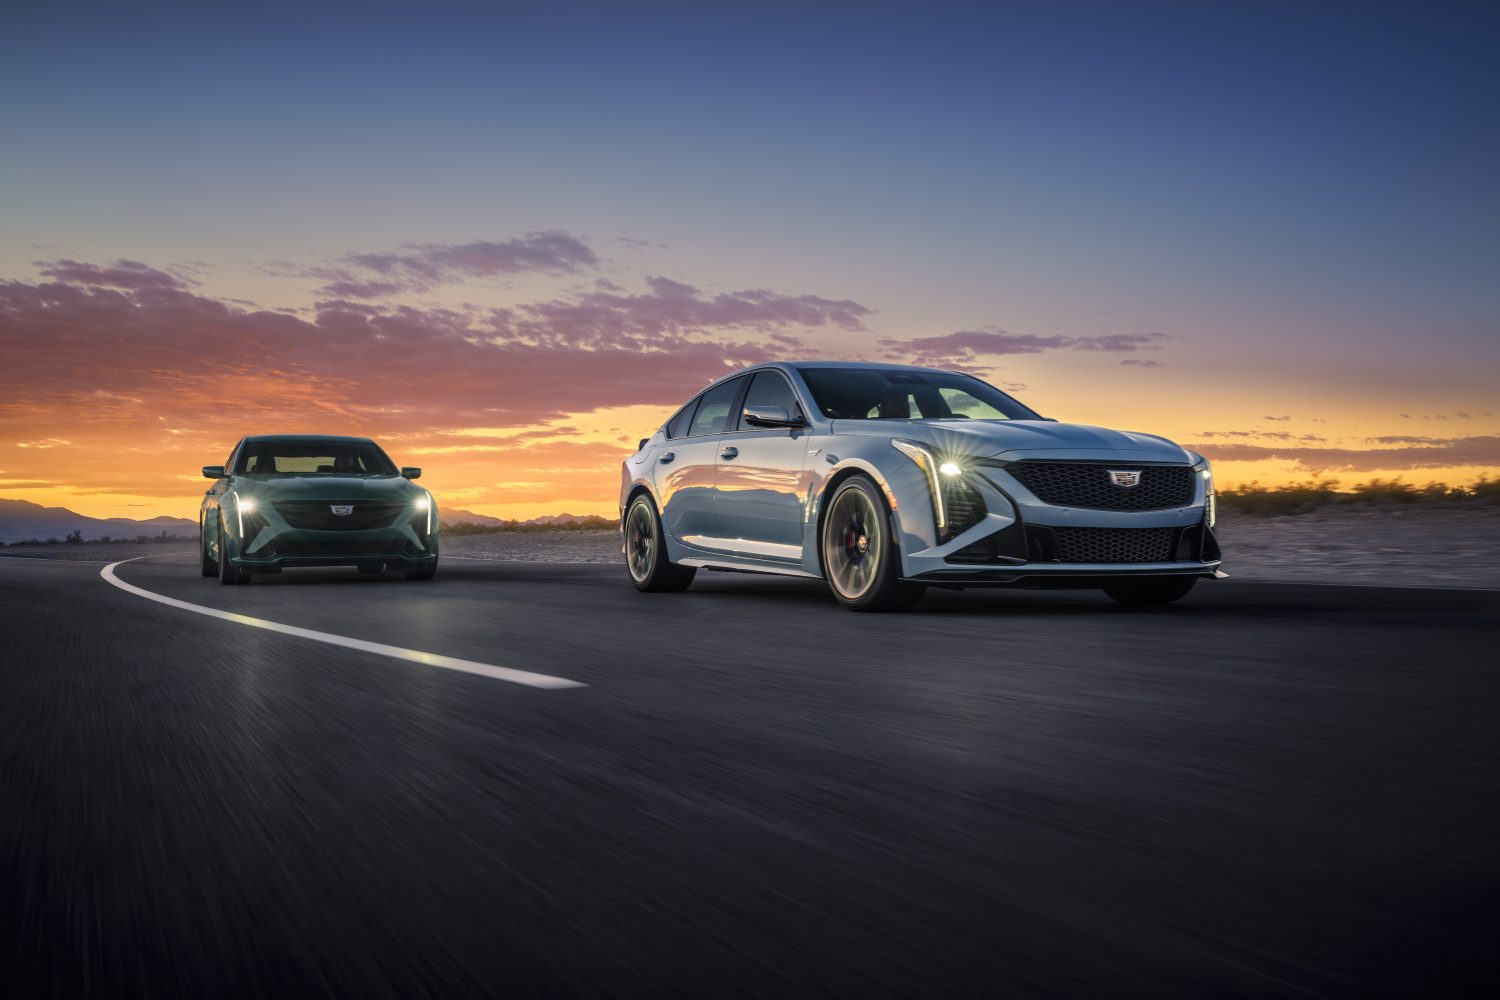 Cadillac is launching two new V-Series models, this time with a greater emphasis on performance and advanced technology.